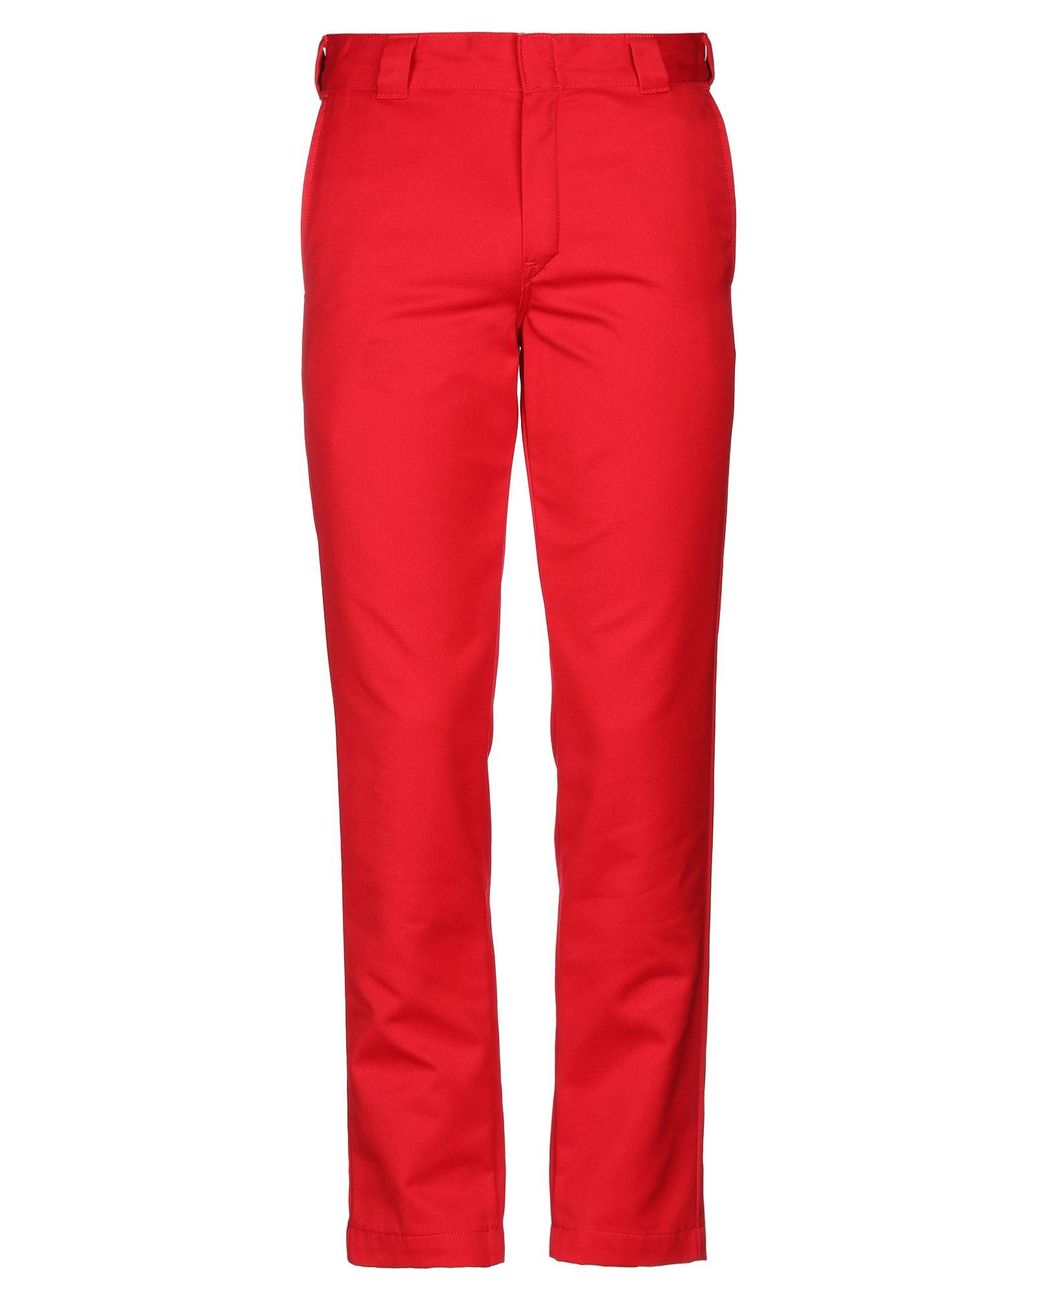 Carhartt Synthetic Casual Pants in Red for Men - Lyst